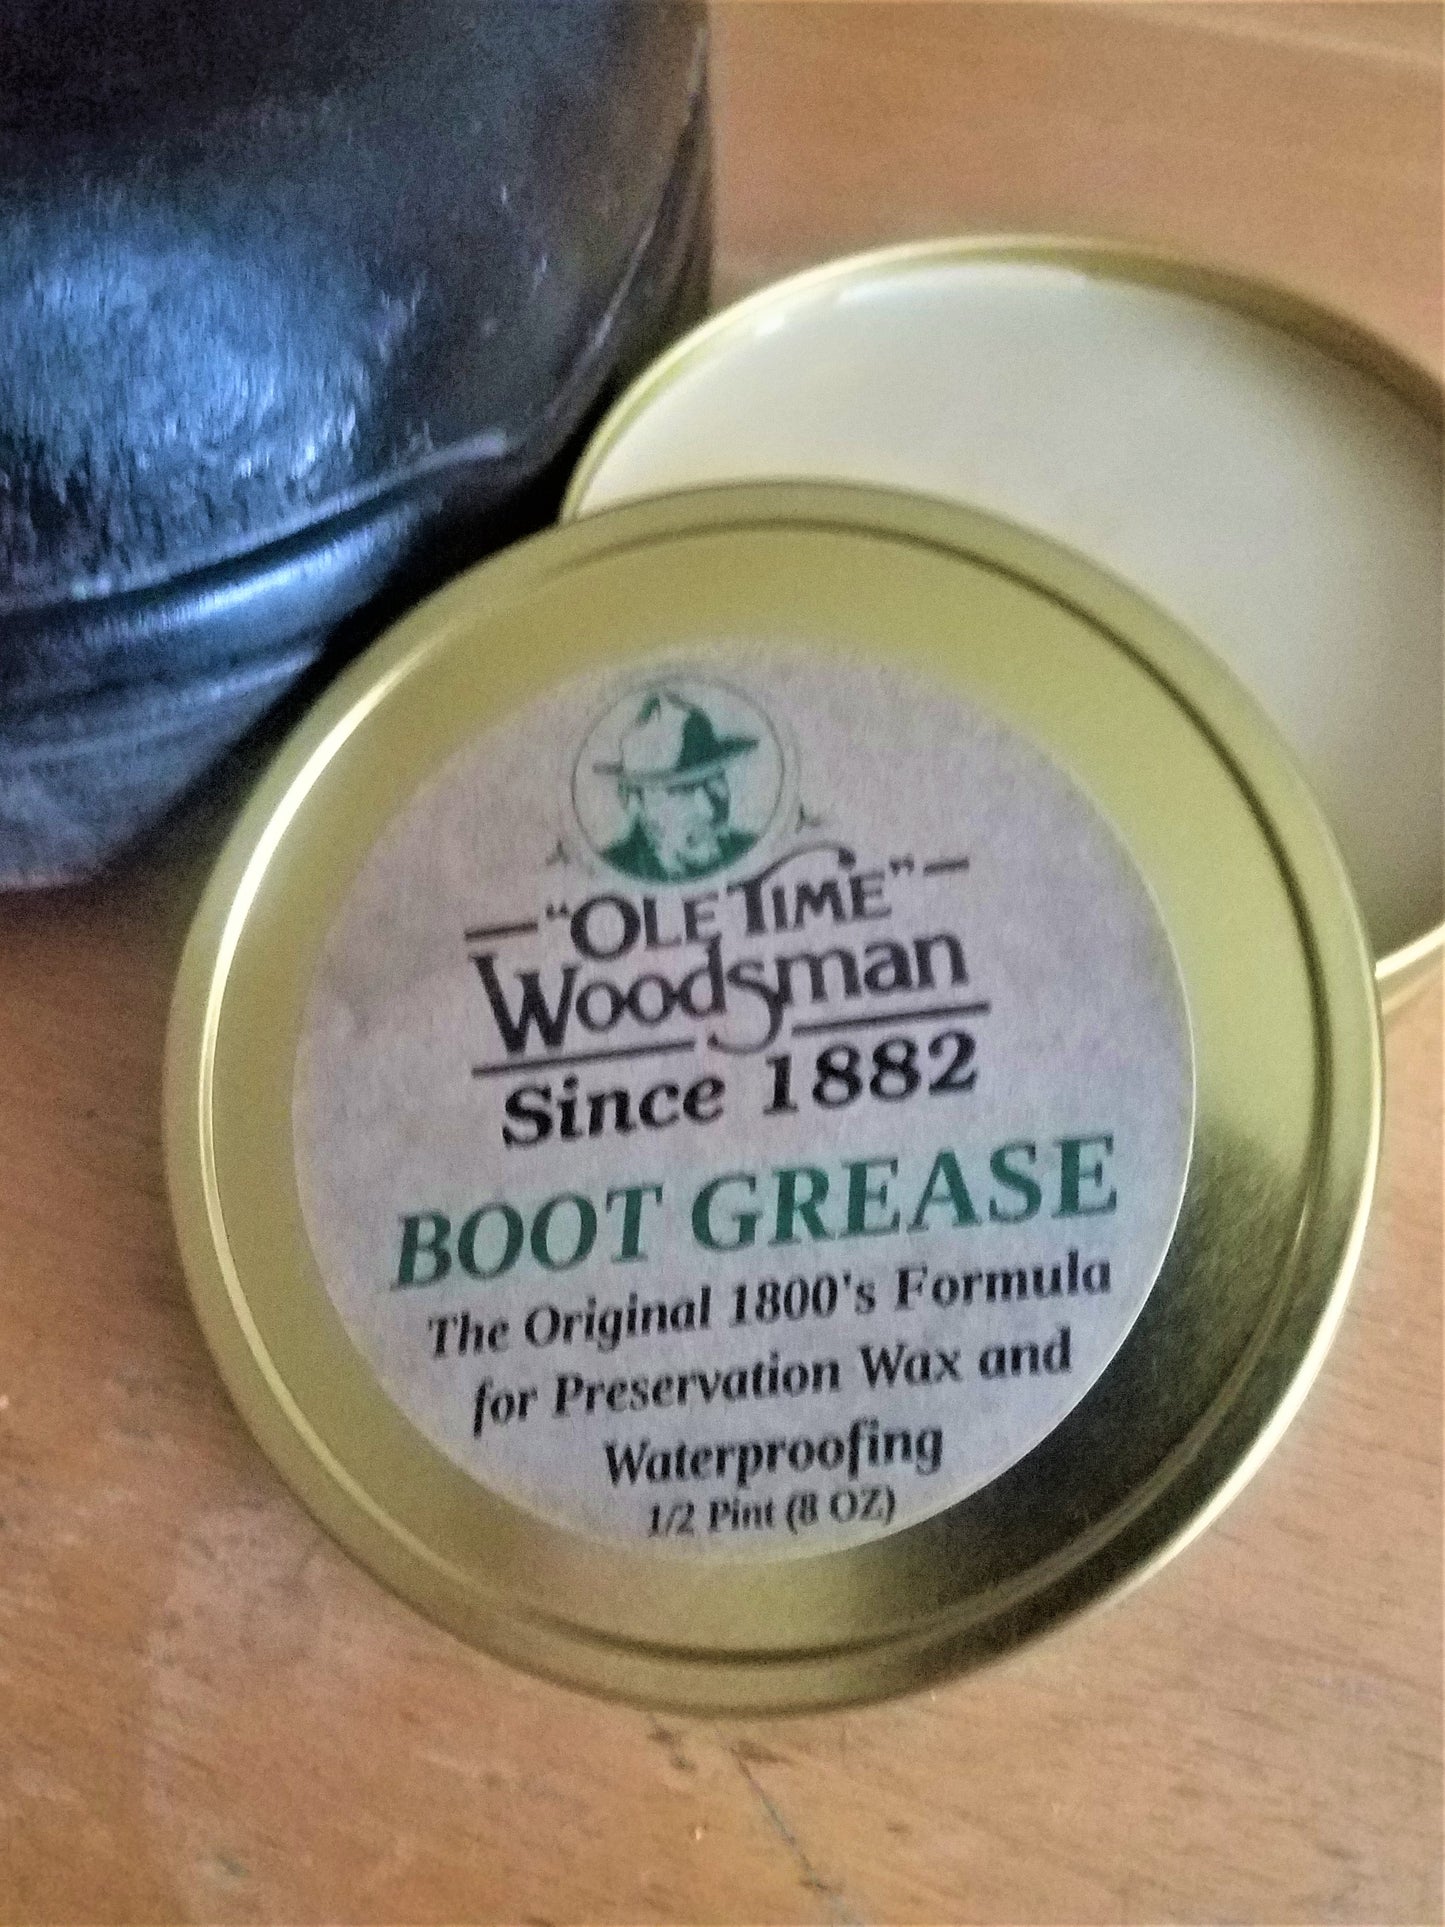 Ole Time Woodsman Boot Grease. The Original 1800's Formula for Preservation Wax and Waterproofing. - Ole Time Woodsman